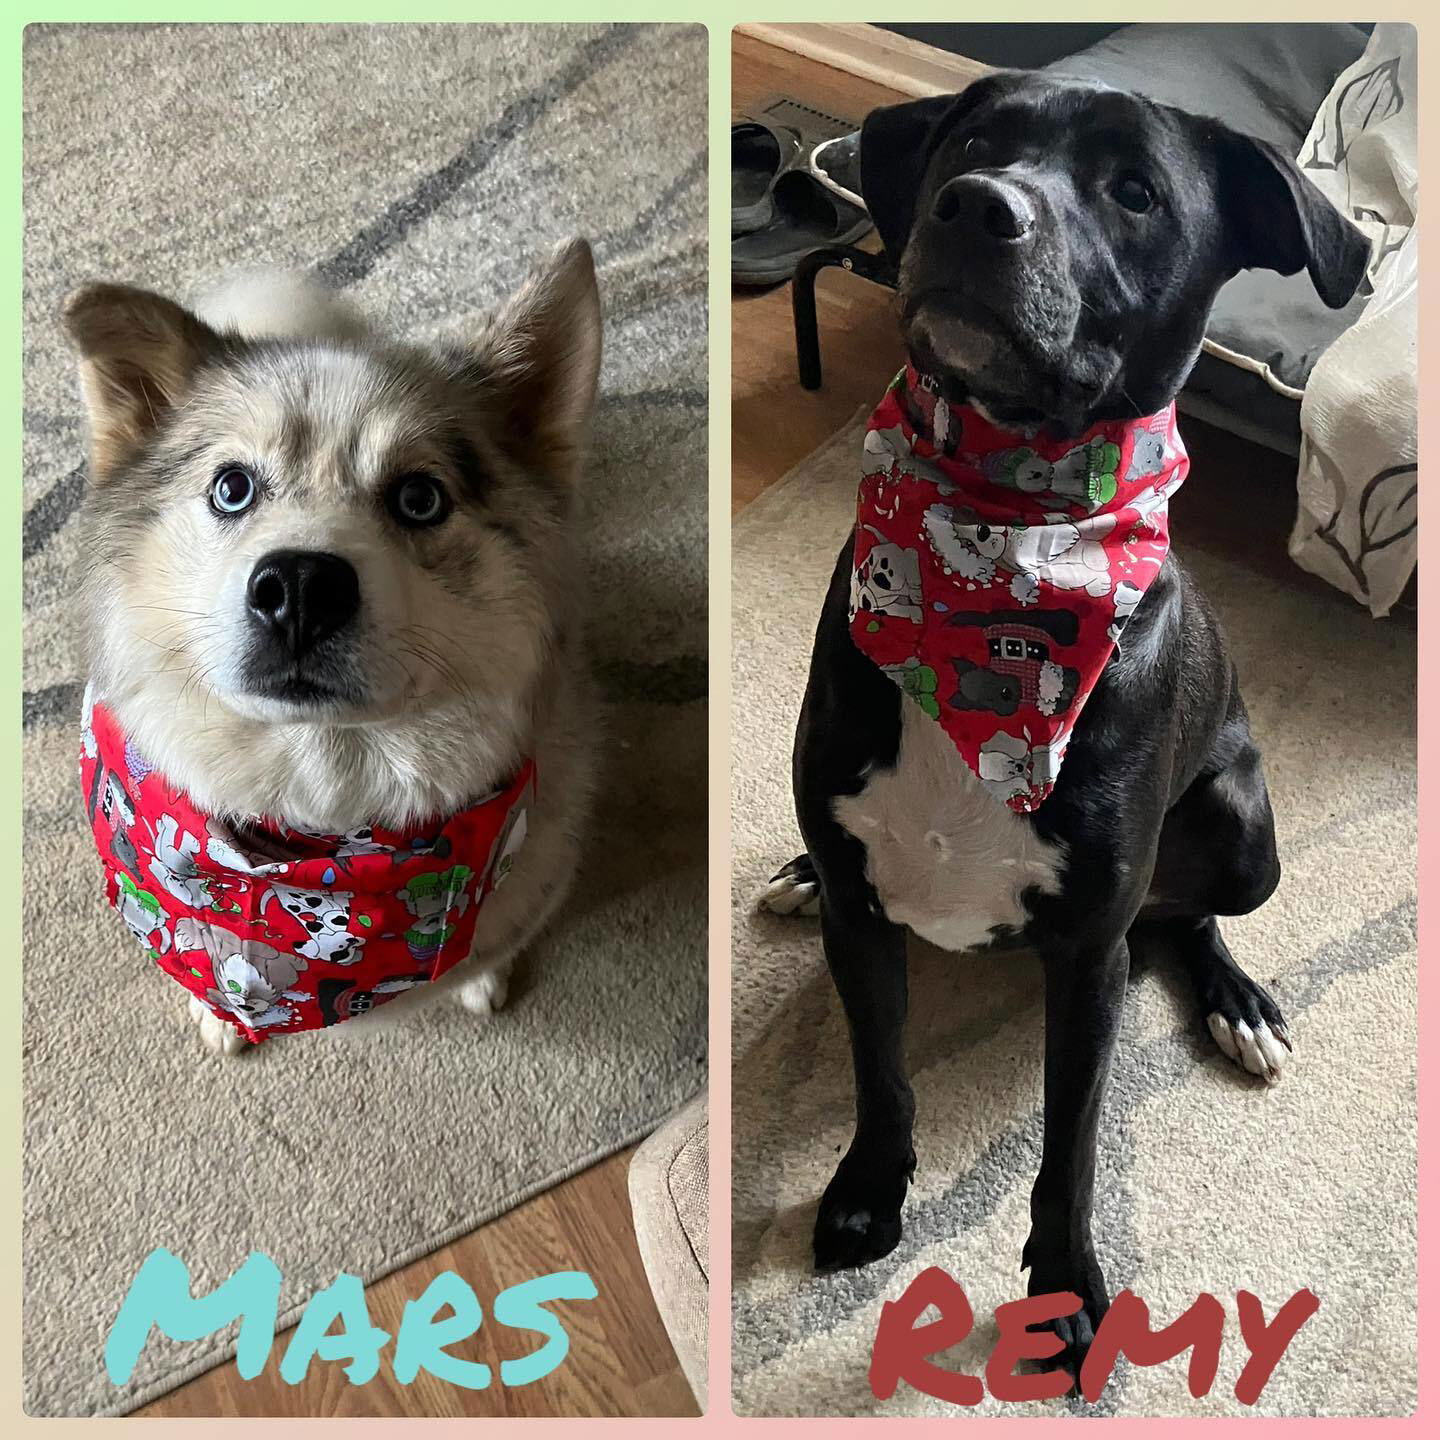 12/14/2022 Mars and Remy